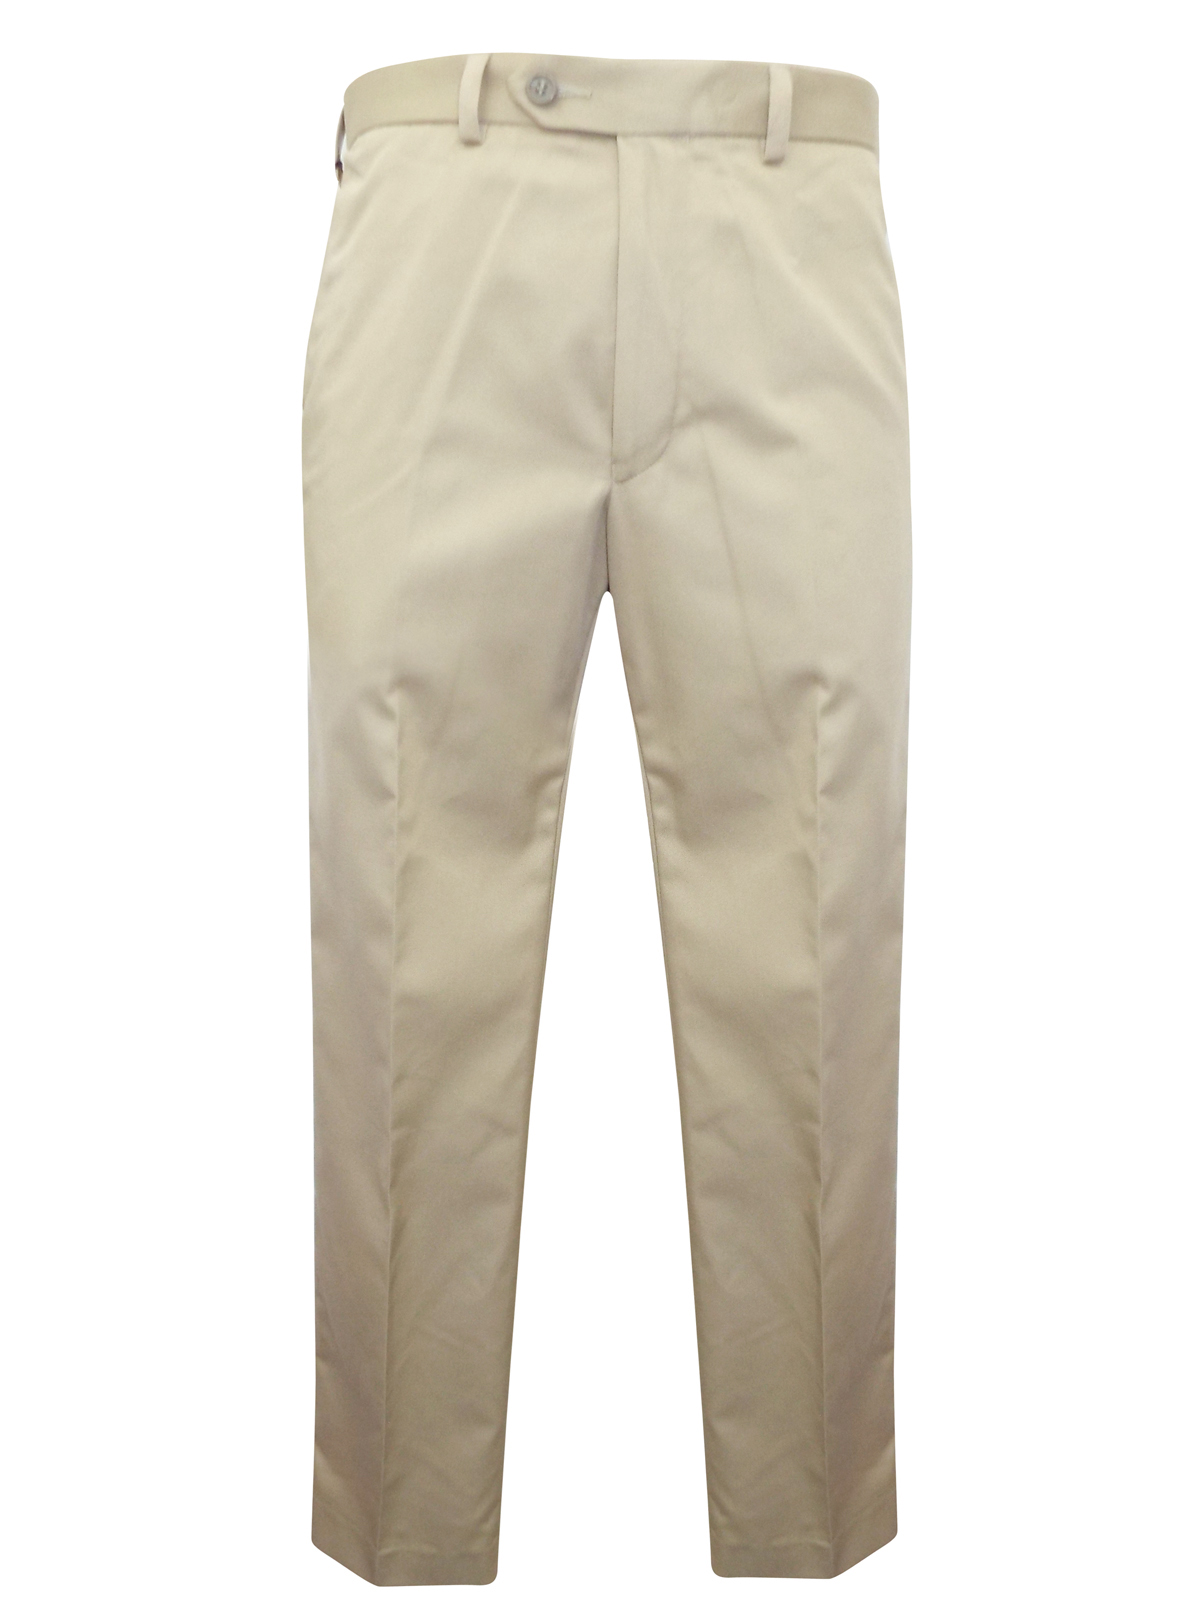 Marks and Spencer - - M&5 SAND Cotton Rich Regular Fit Chinos - Waist ...